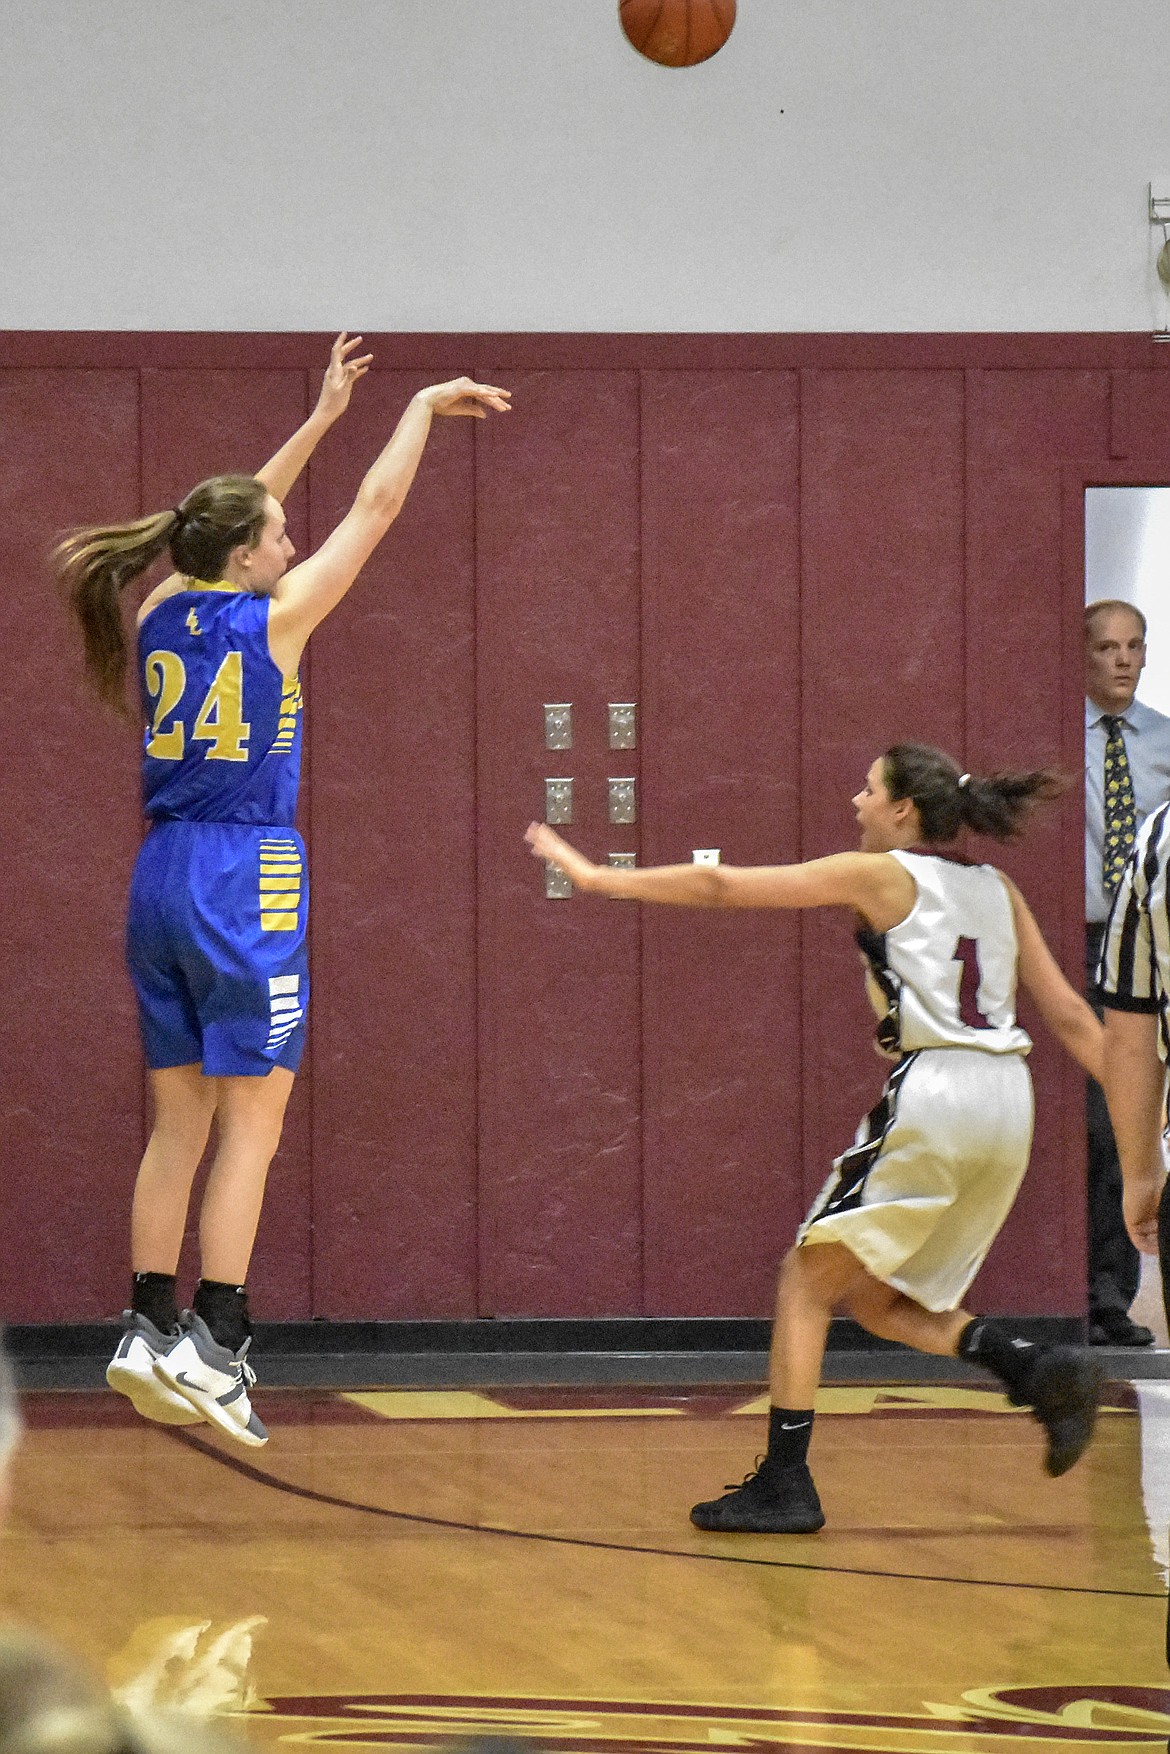 Libby senior Jayden Winslow makes a three-point shot early in the fourth quarter against Troy at Troy Tuesday. (Ben Kibbey/The Western News)